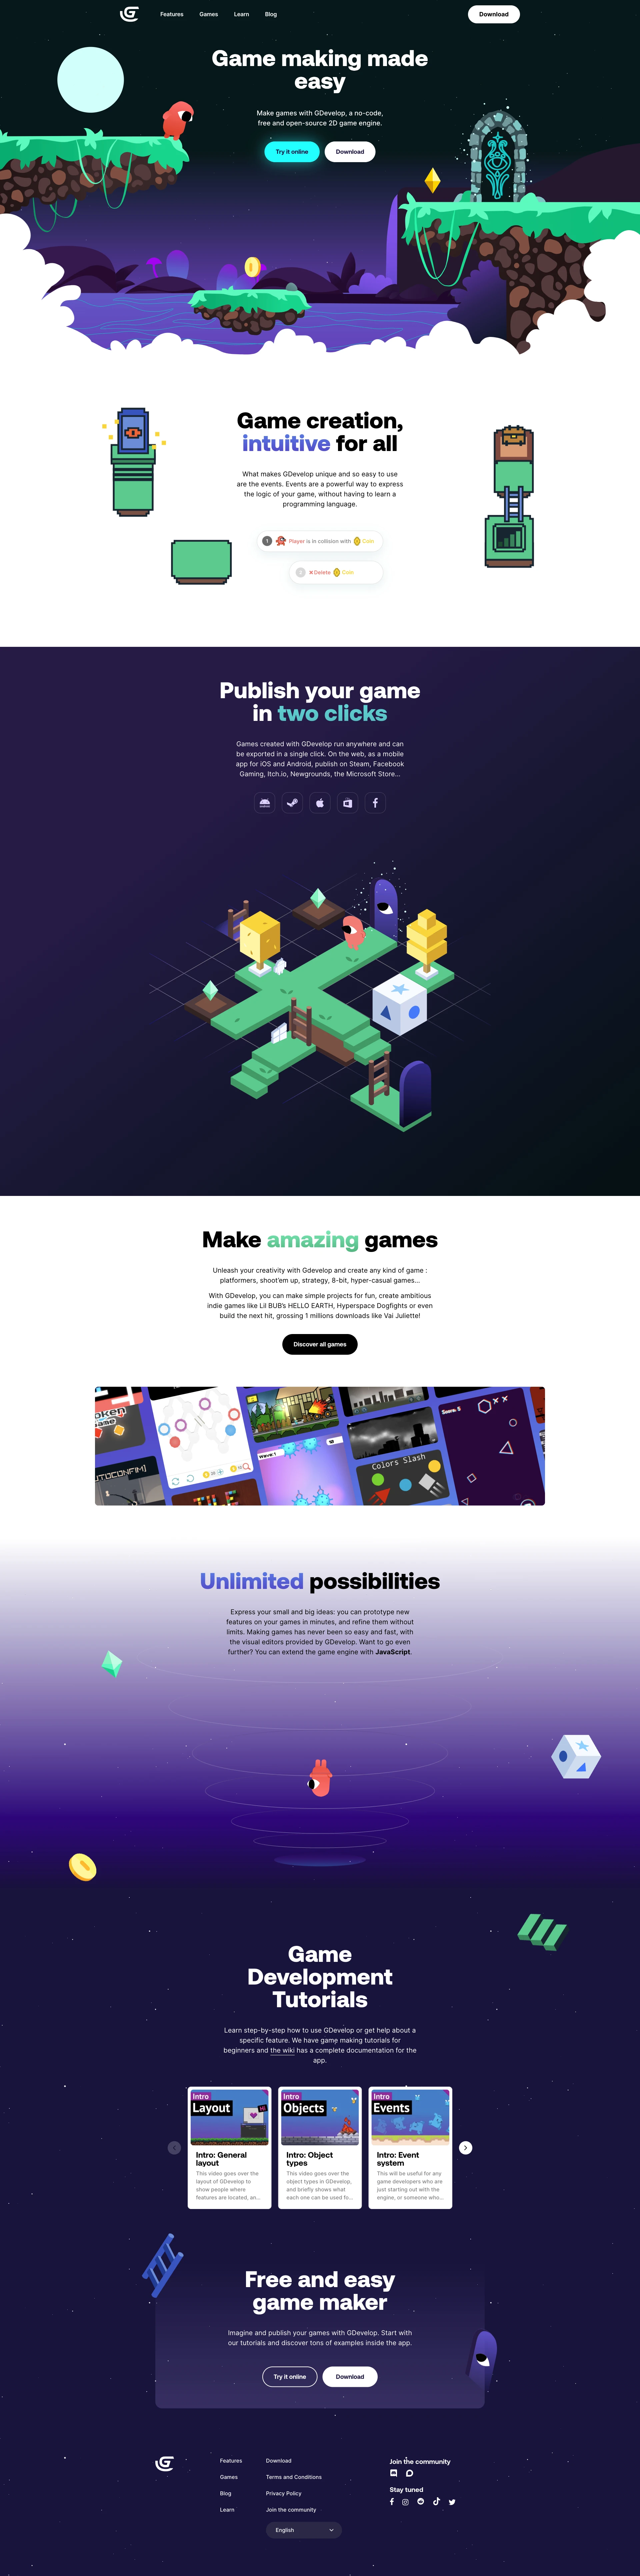 GDevelop Landing Page Example: GDevelop is a free and easy, open-source game making app. Find game development tutorials, publish to Android, iOS and more.